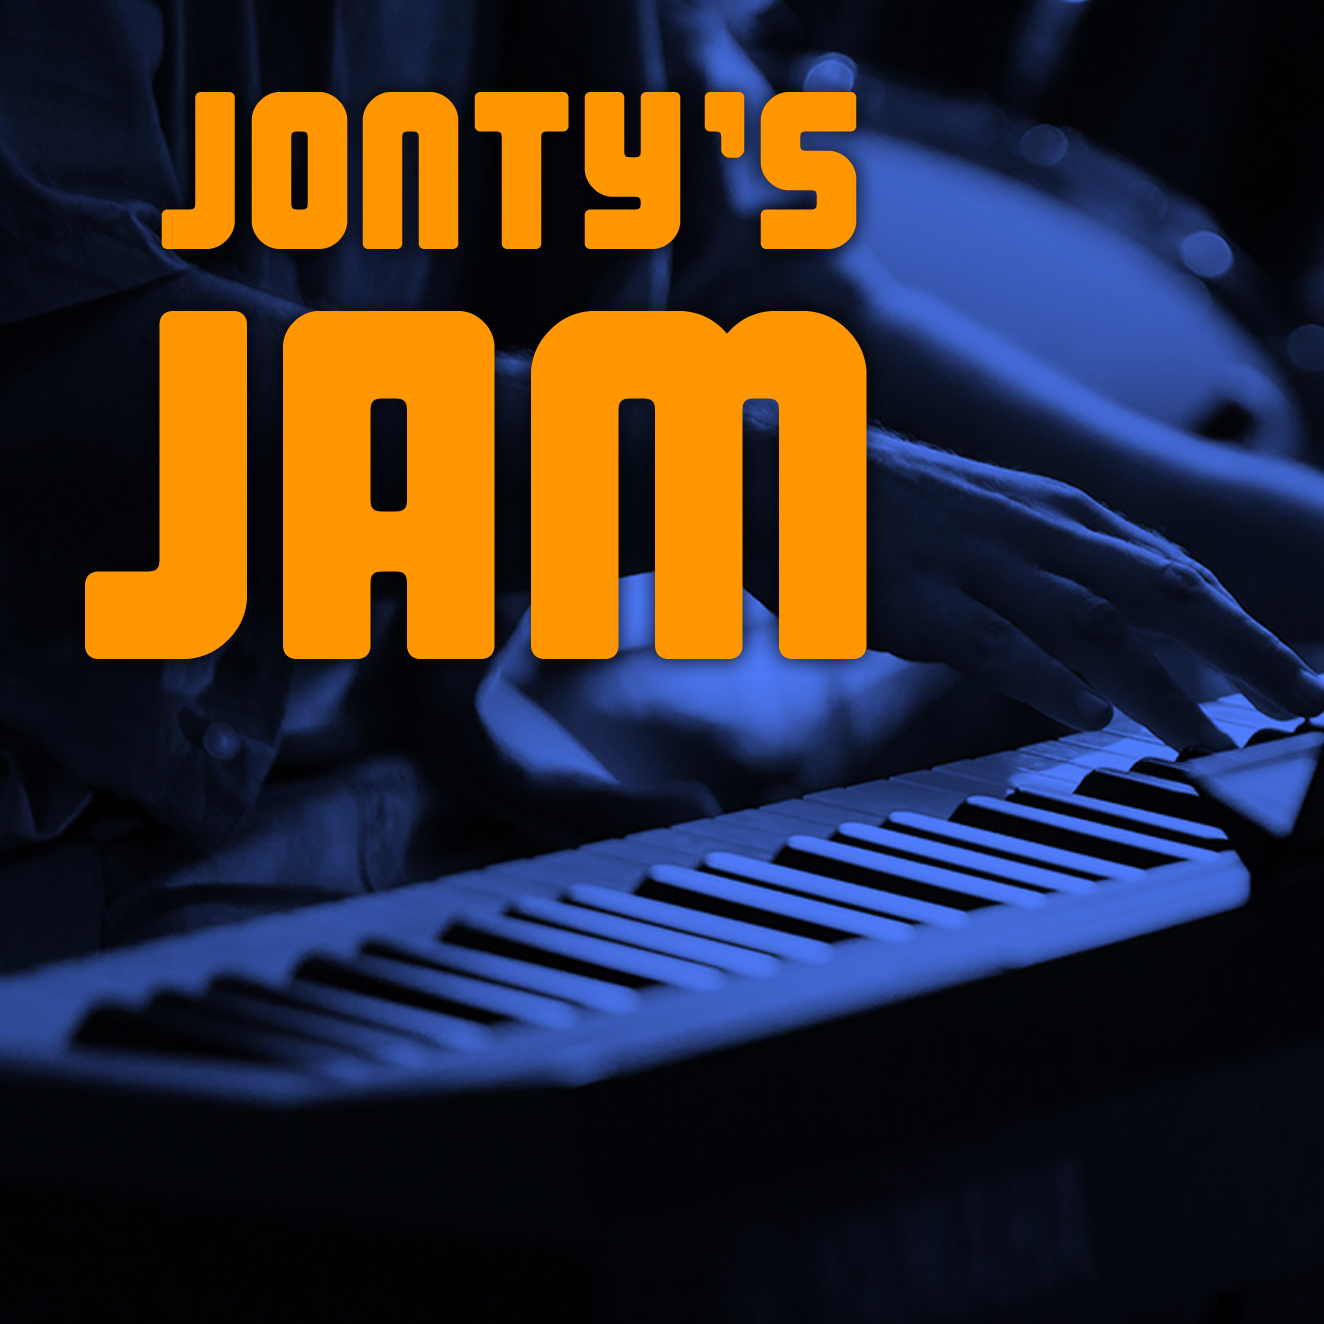 hands playing a piano with the logo Jonty's Jam